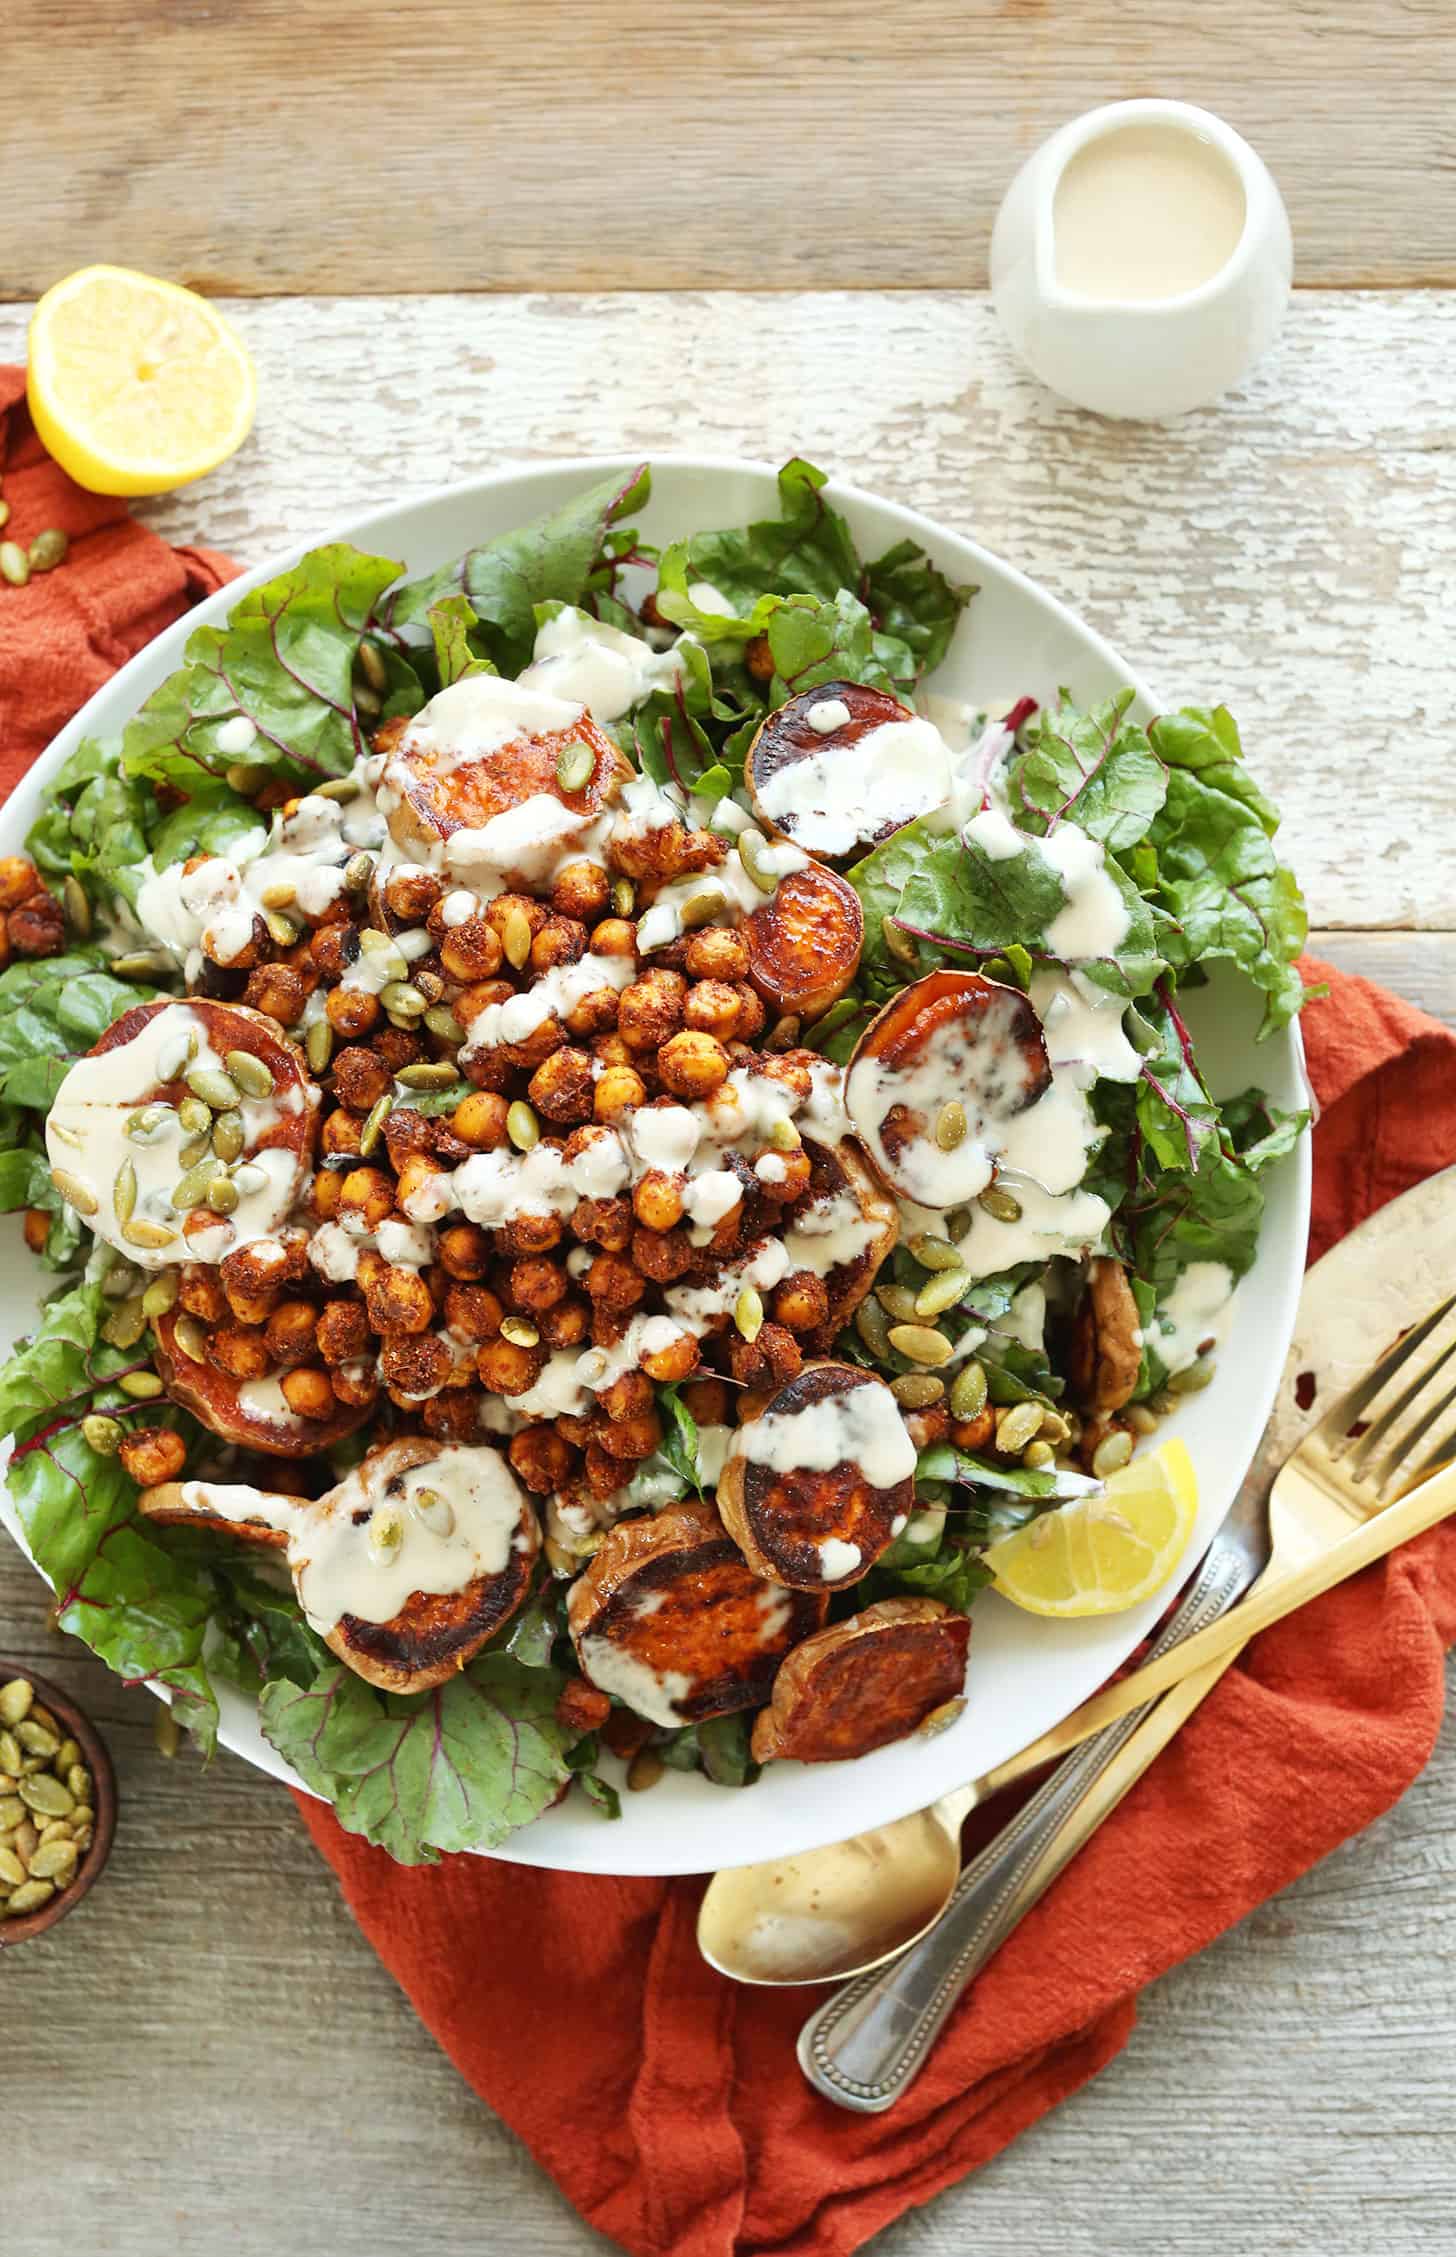 These 15 Vegetarian Recipes Are So Satisfying You’ll Want to Go Meatless for an Entire Month! Now I have some healthy veggie recipes to try for breakfast, lunch, and dinner like this Healthy Roasted Sweet Potato Crispy Chickpea Salad!